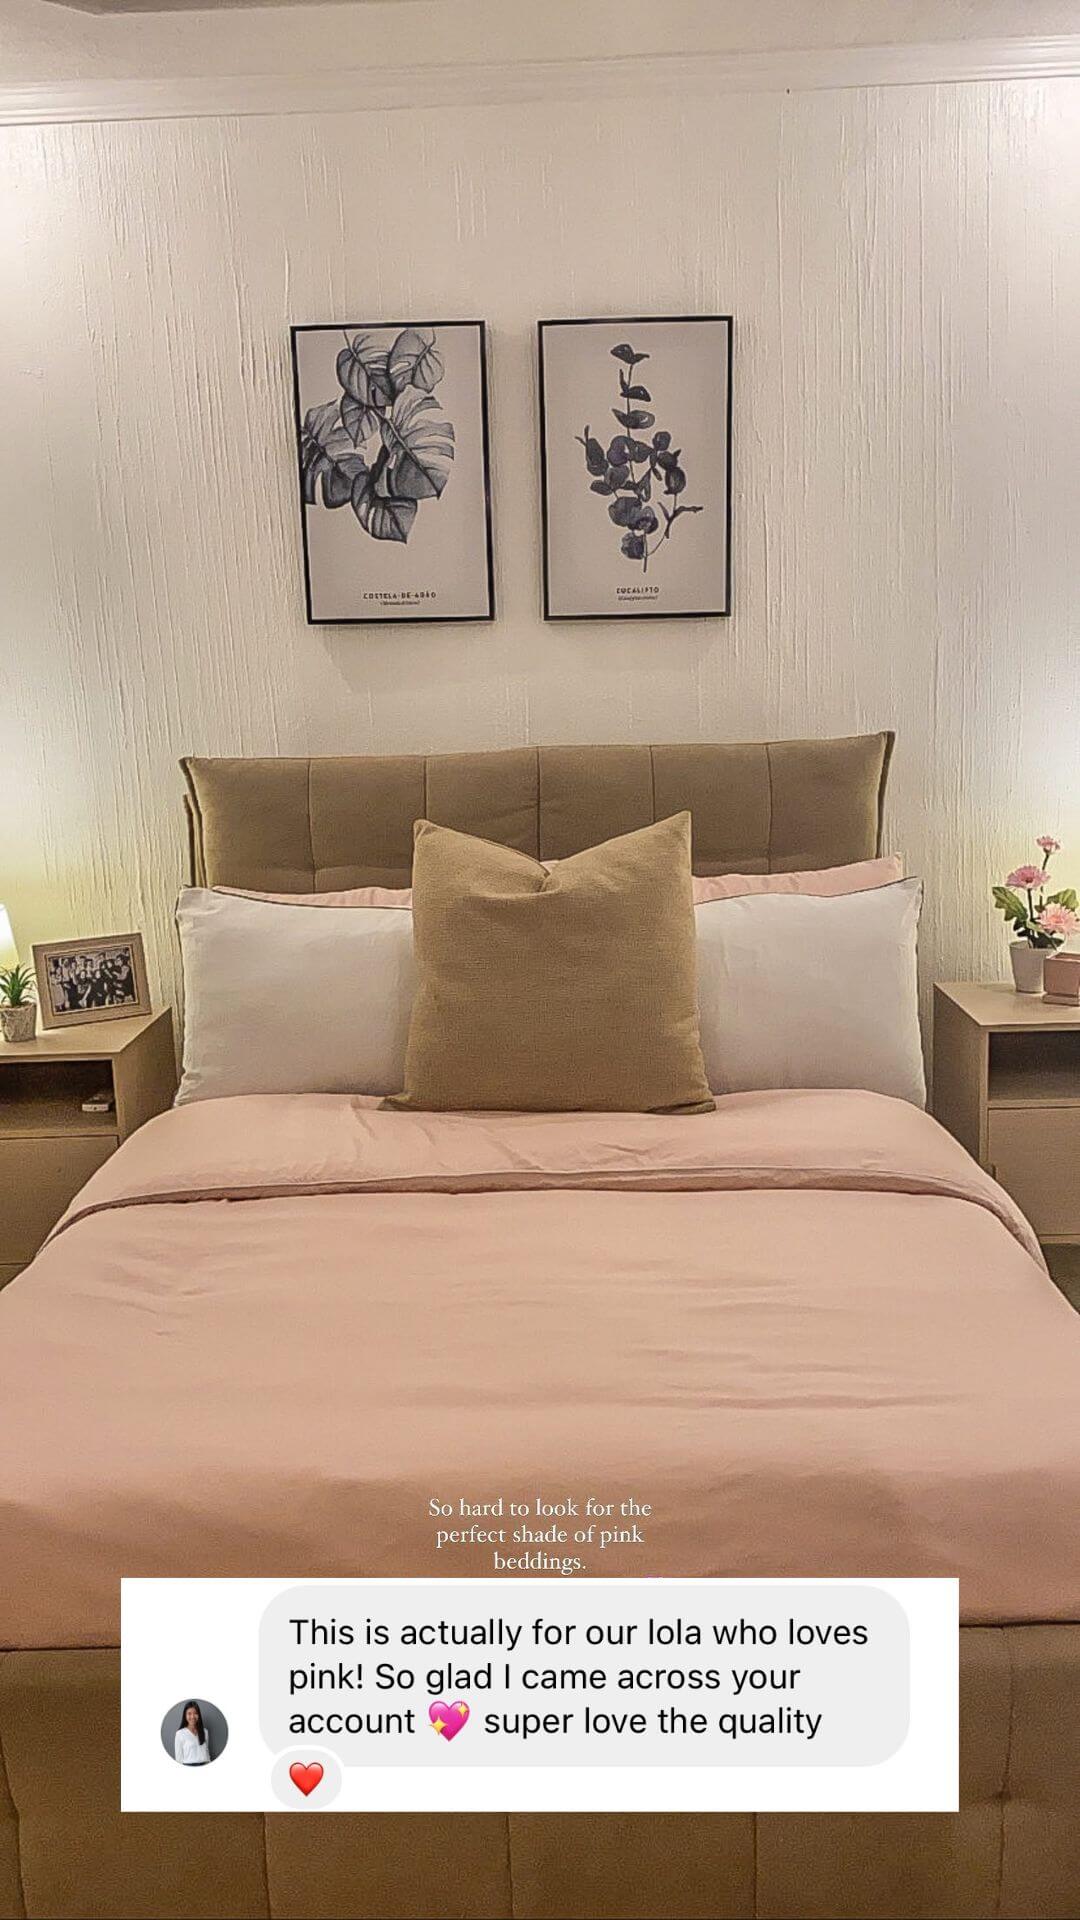 ava and ava ph review - cooling, silky soft organic bamboo lyocell sheet set, pillowcases, duvet cover in blush pink with white piping, perfect for elderly